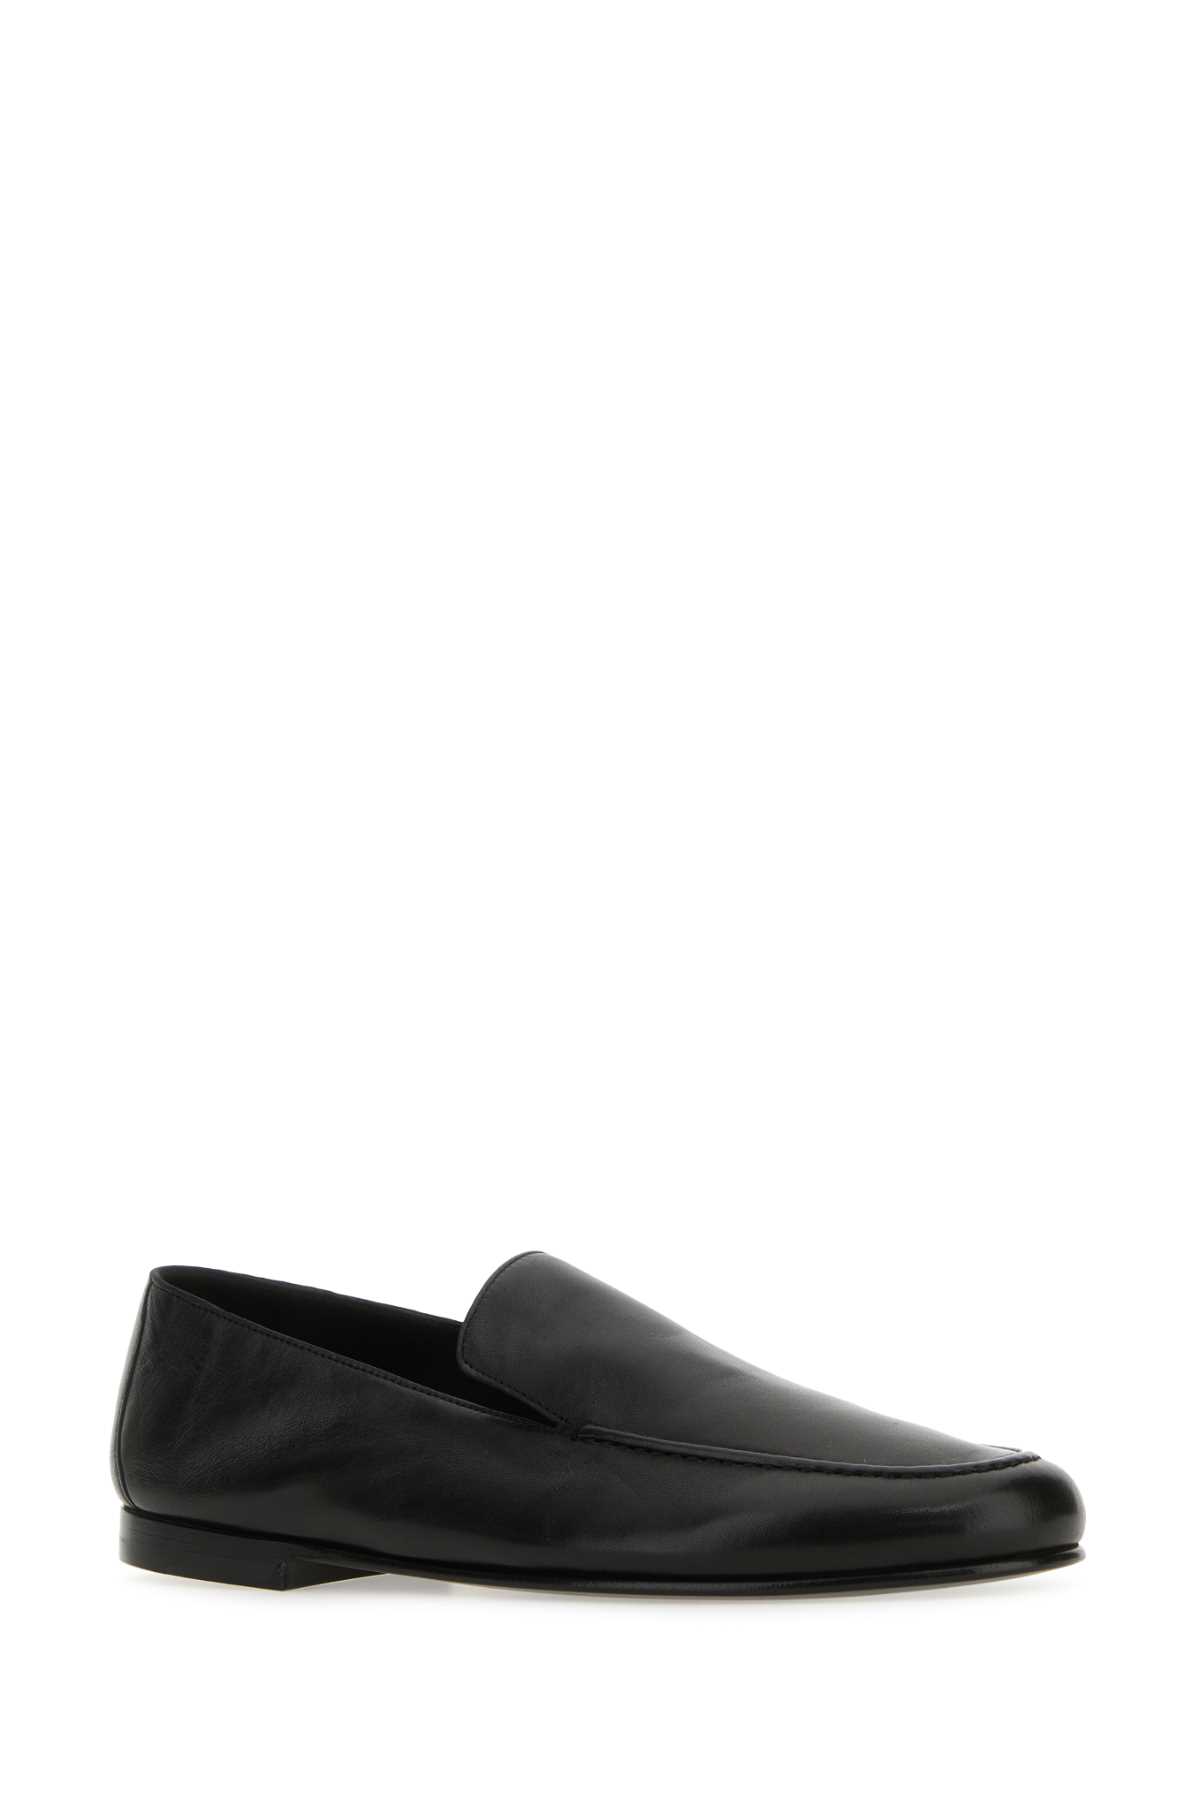 Shop The Row Black Leather Colette Loafers